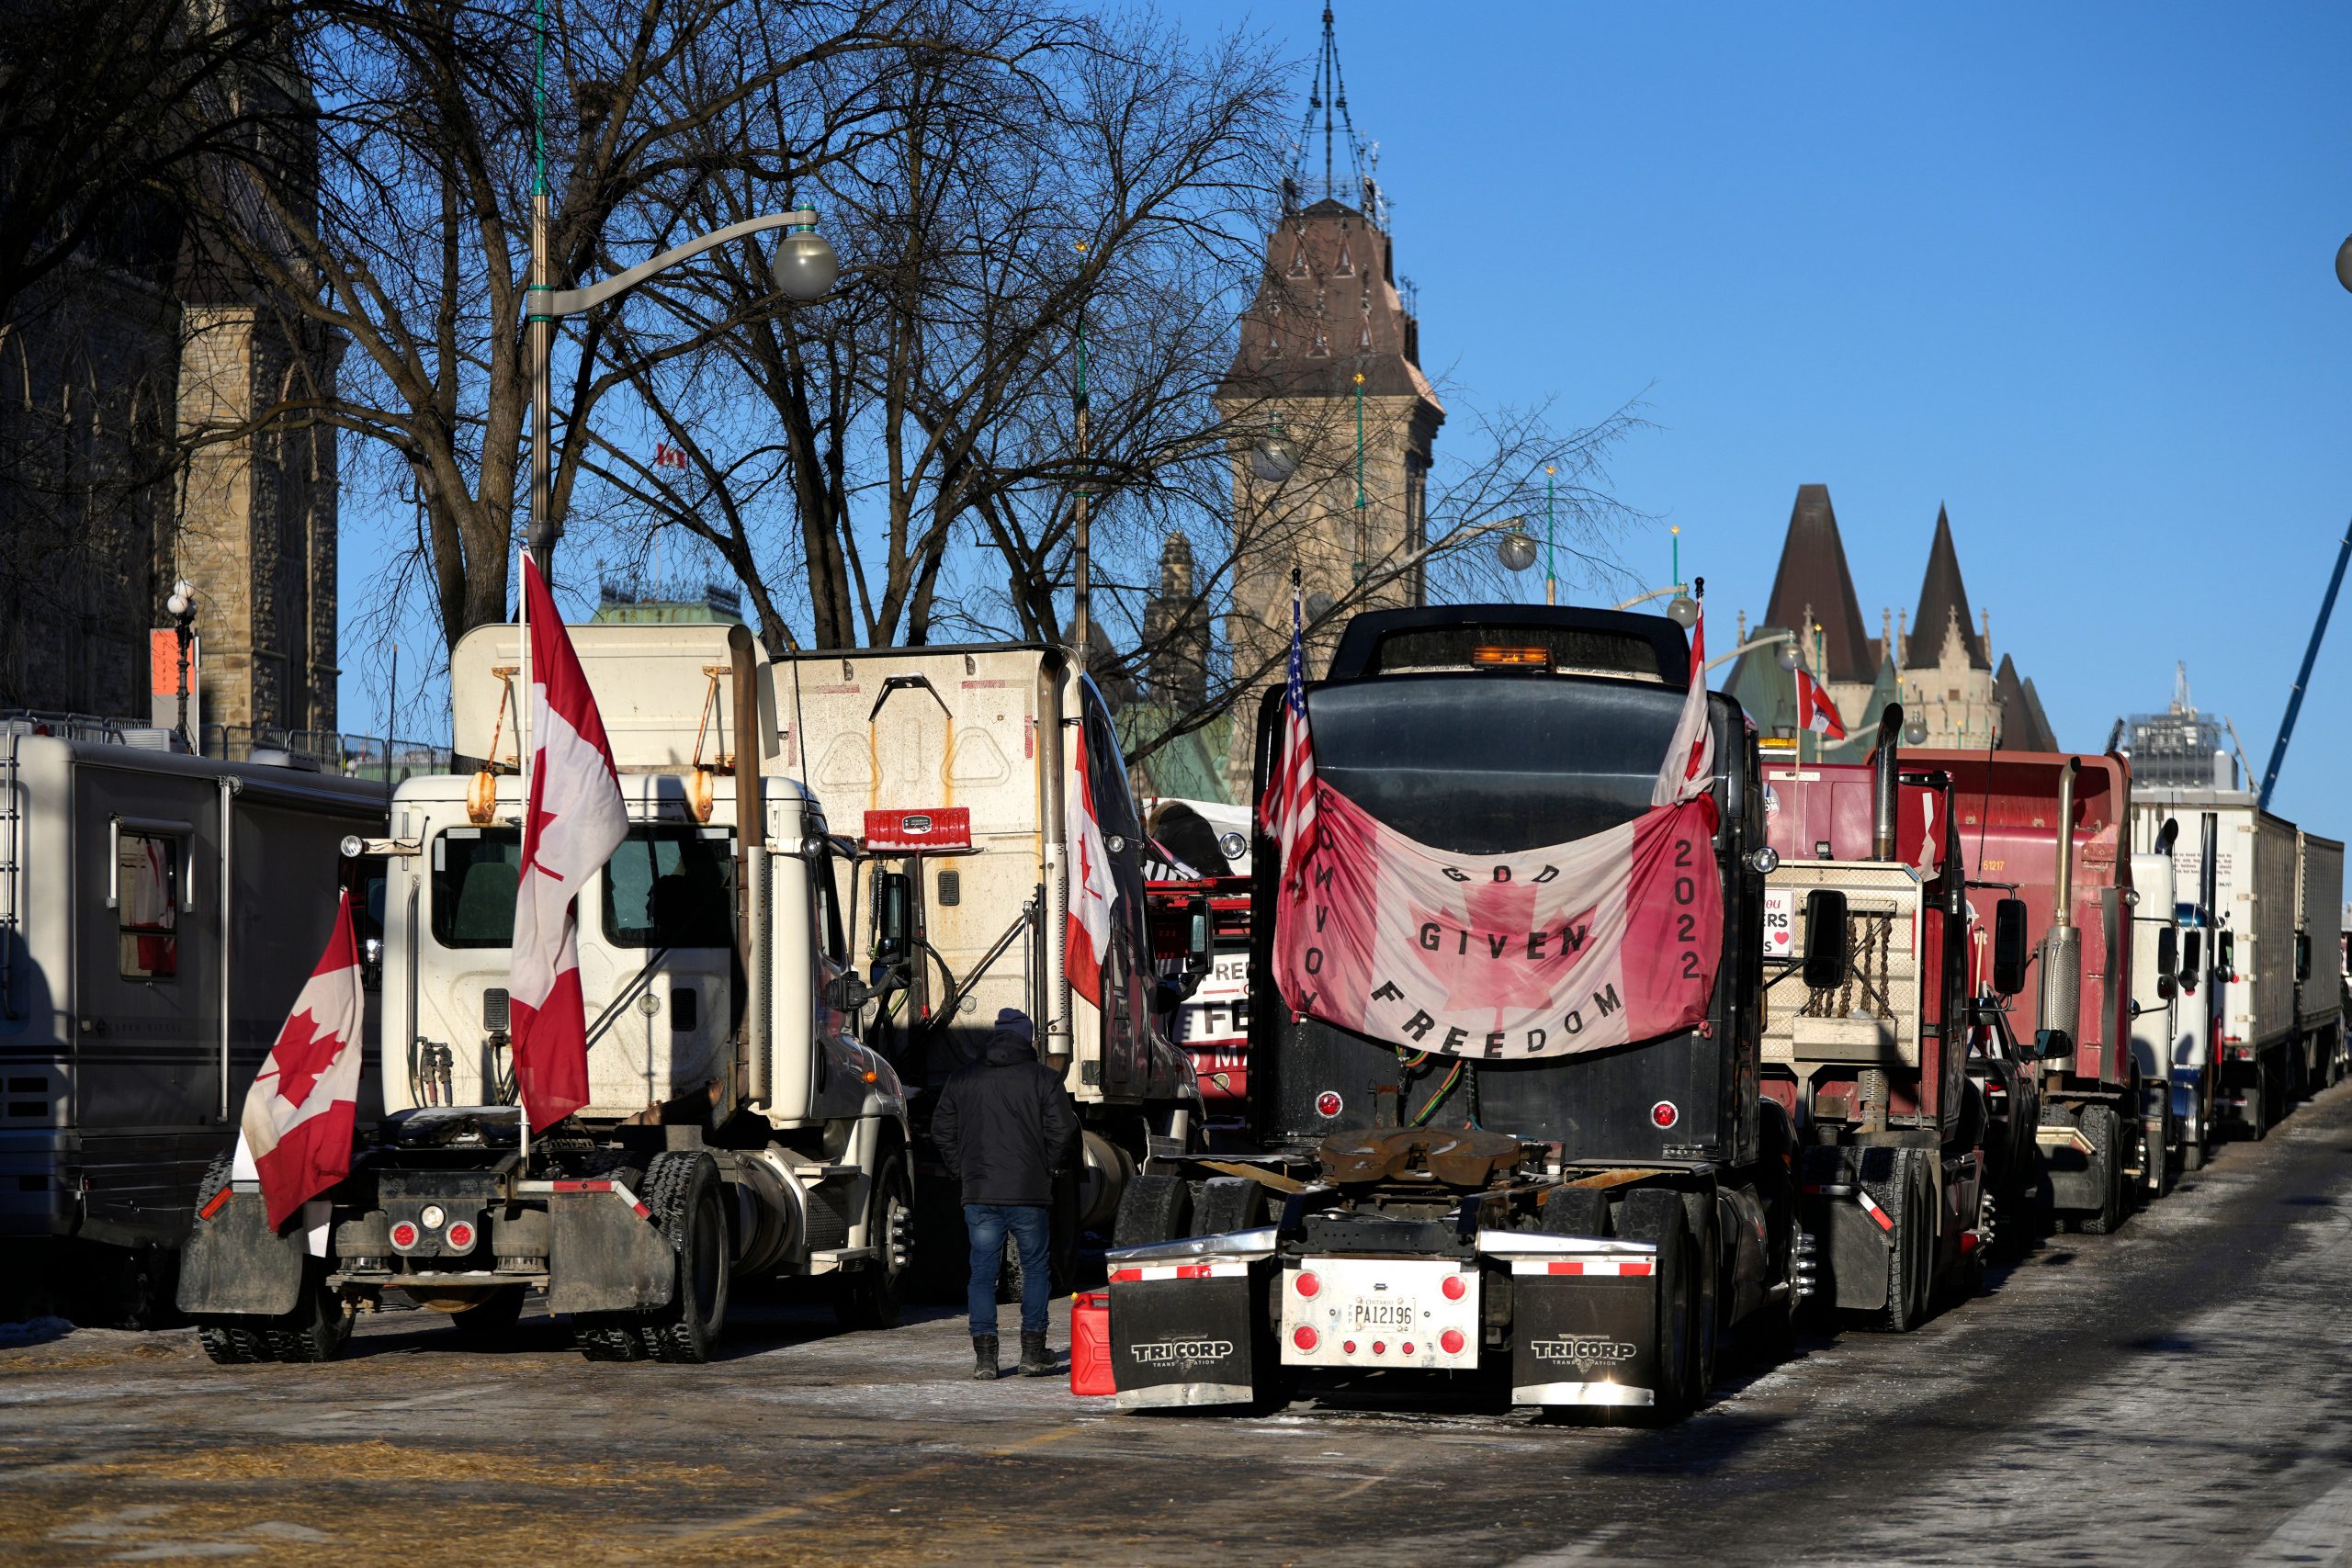 Ottawa police chief resigns amid trucker protest in capital